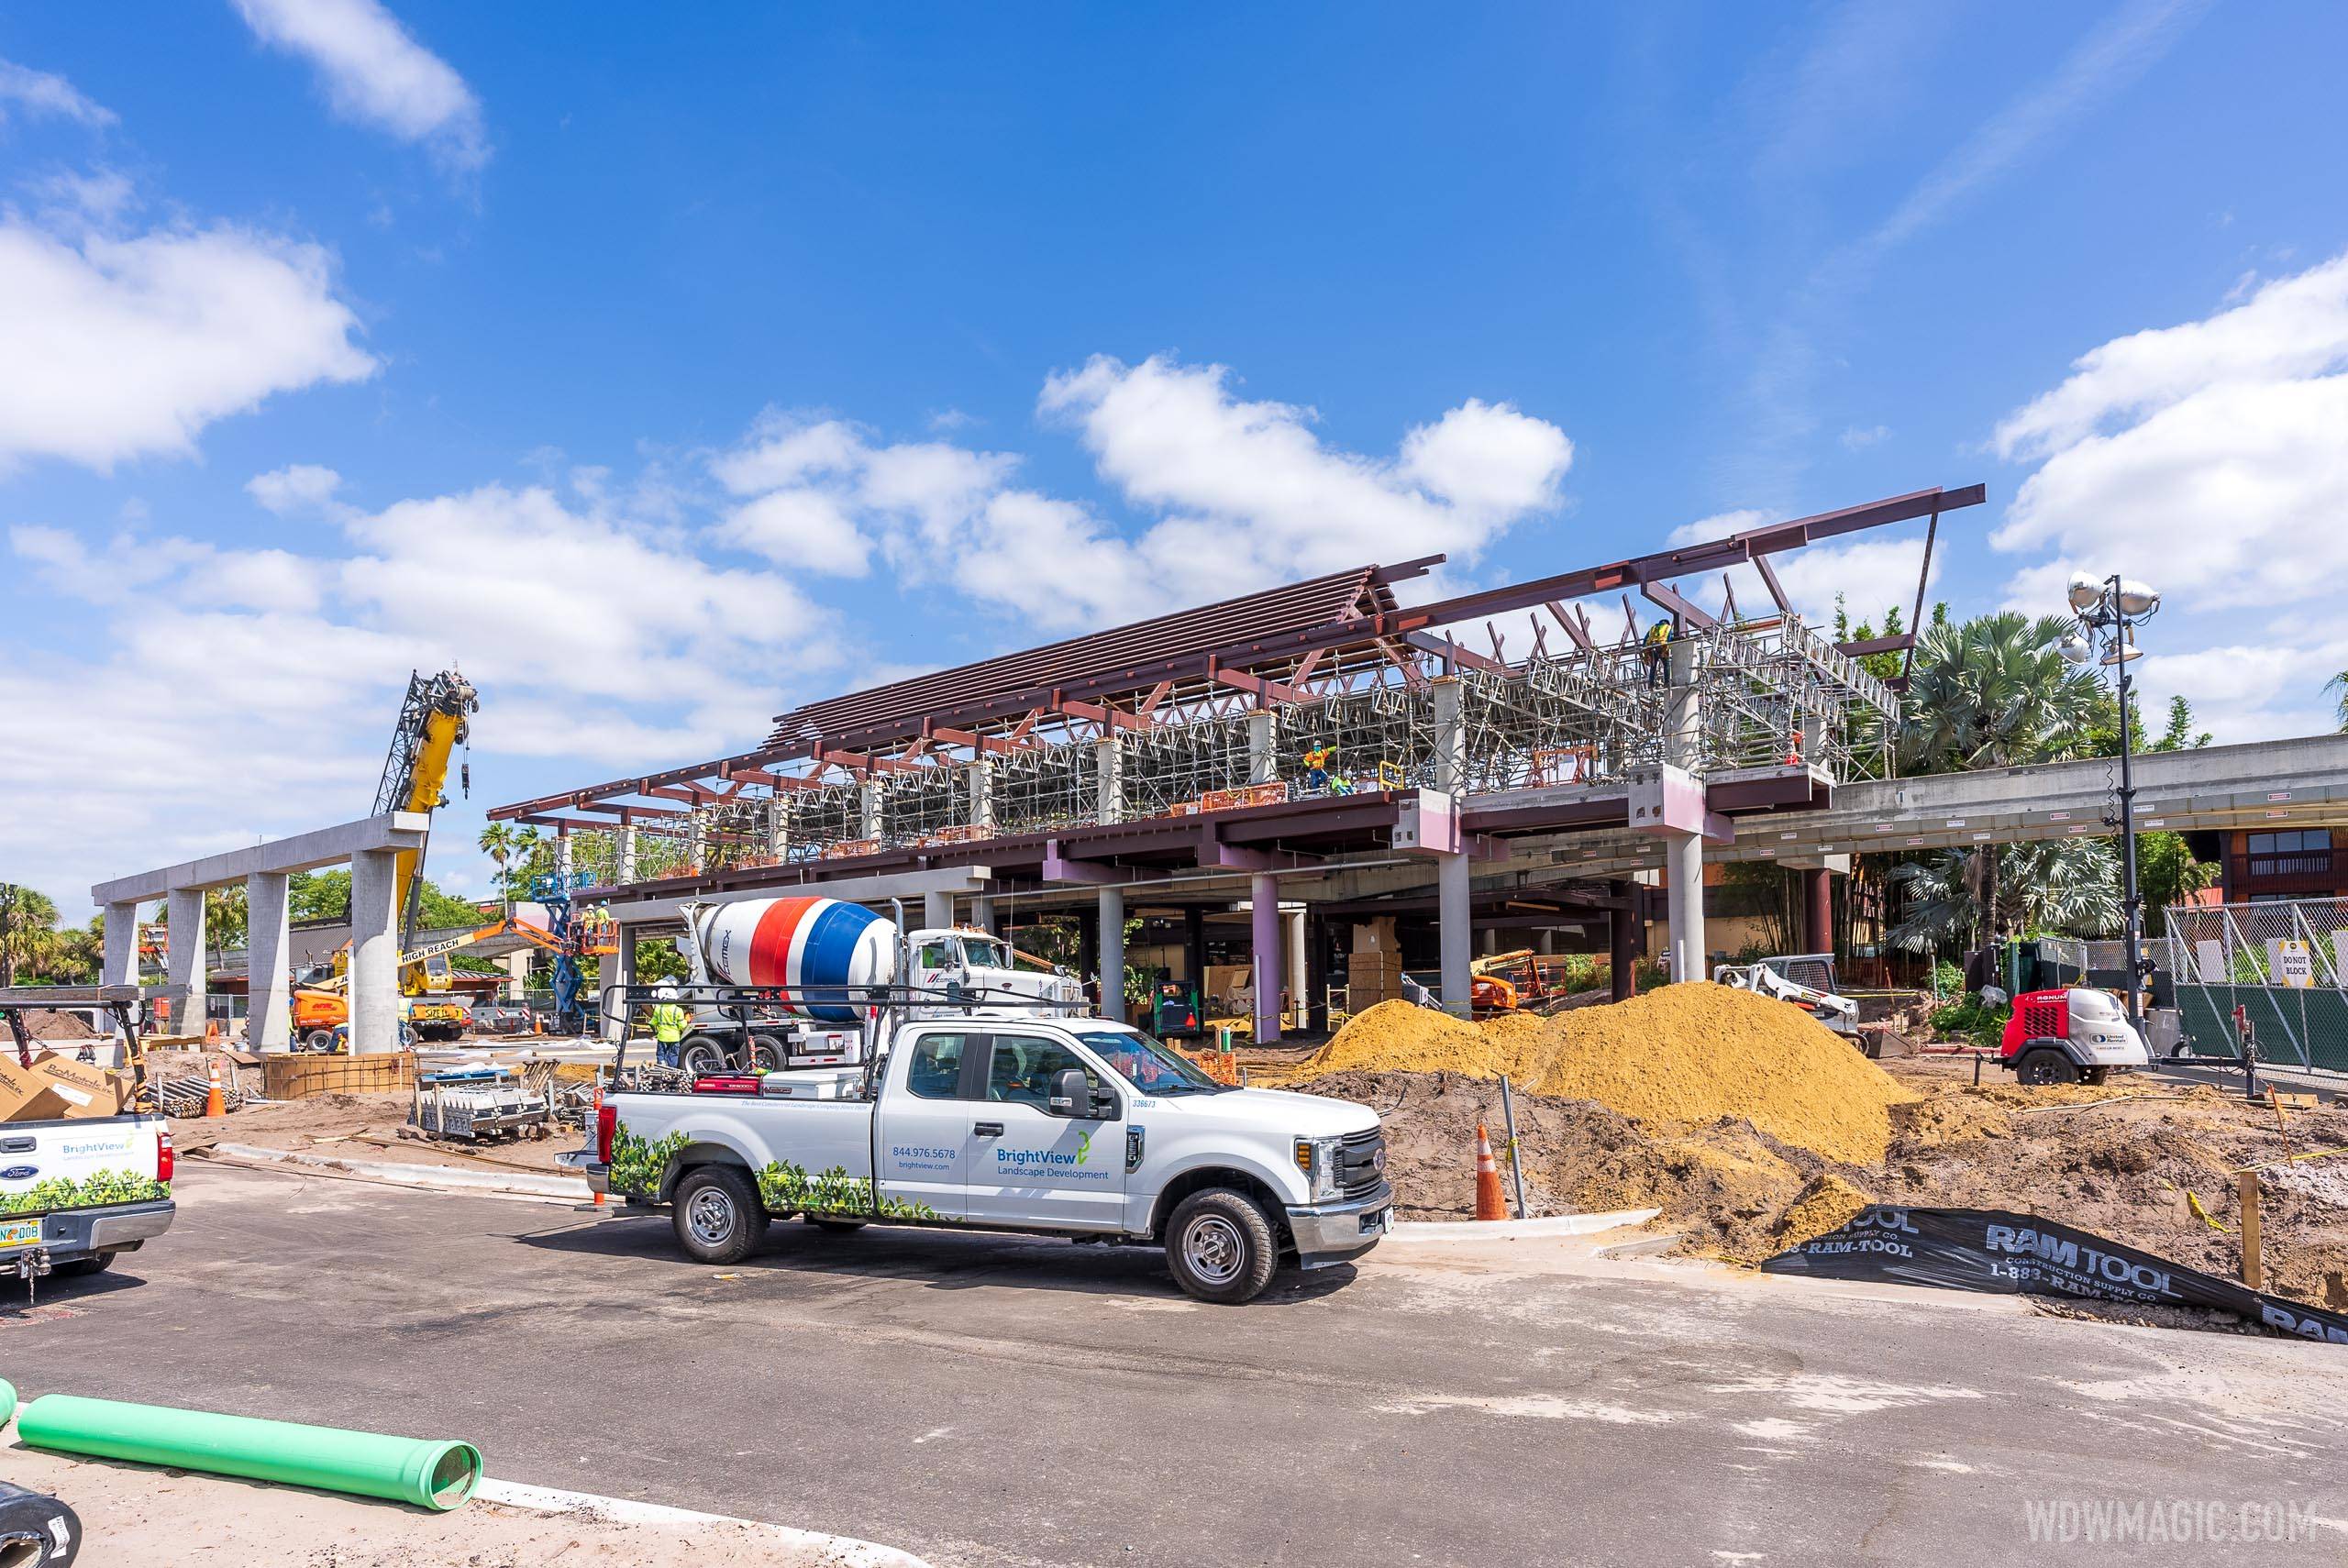 The new arrival area at Disney's Polynesian Village Resort